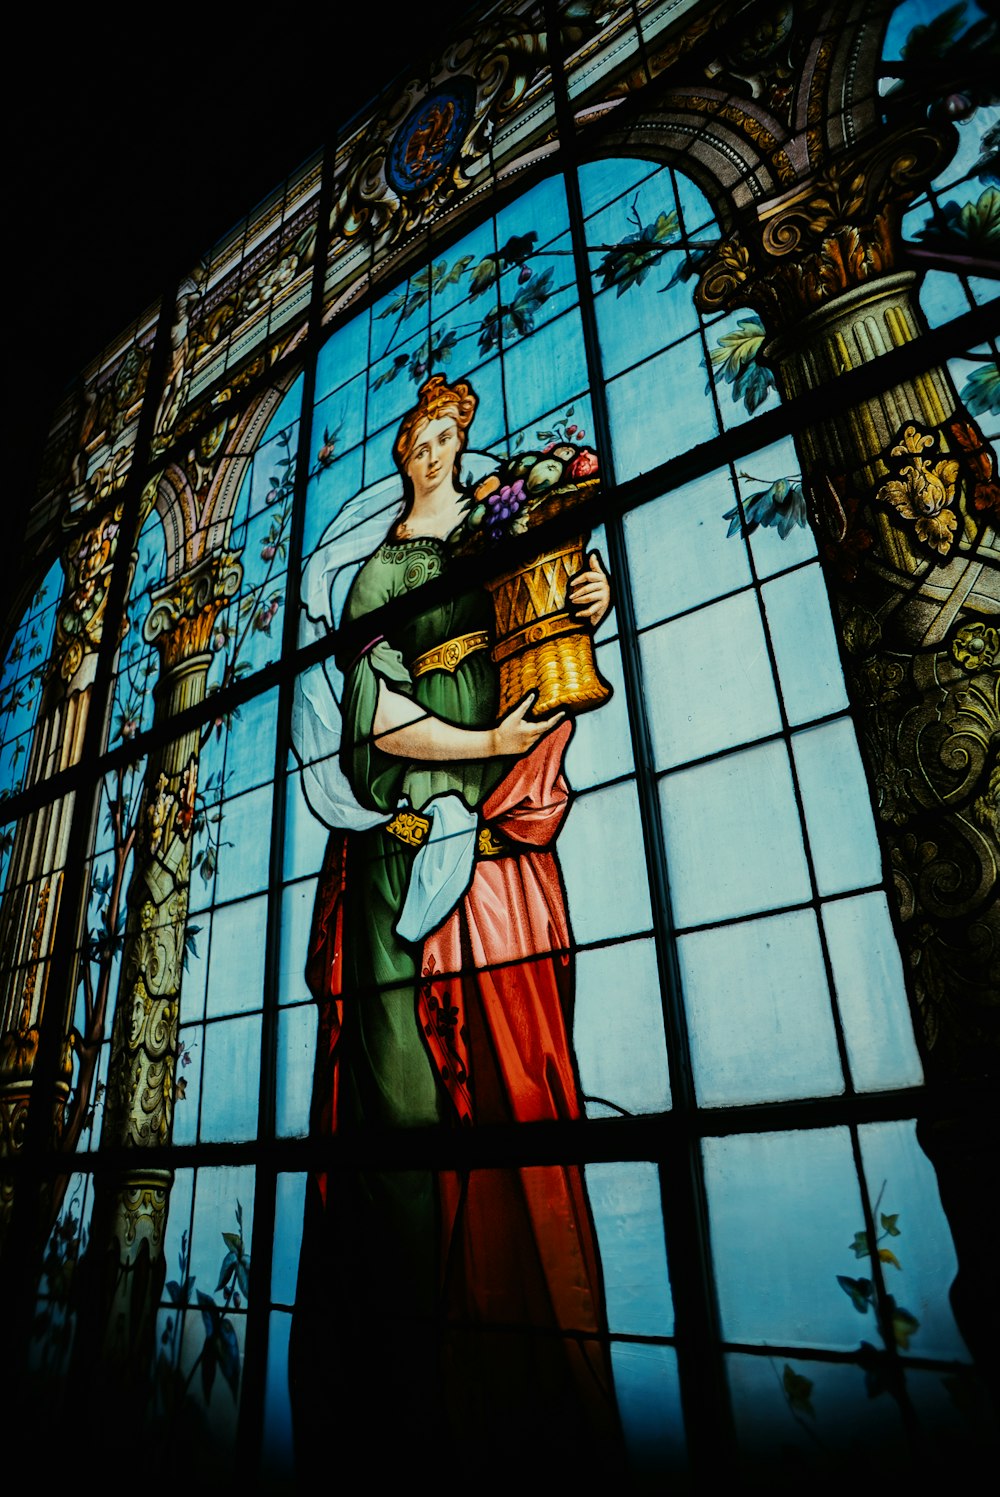 a stained glass window with a woman holding a basket of flowers